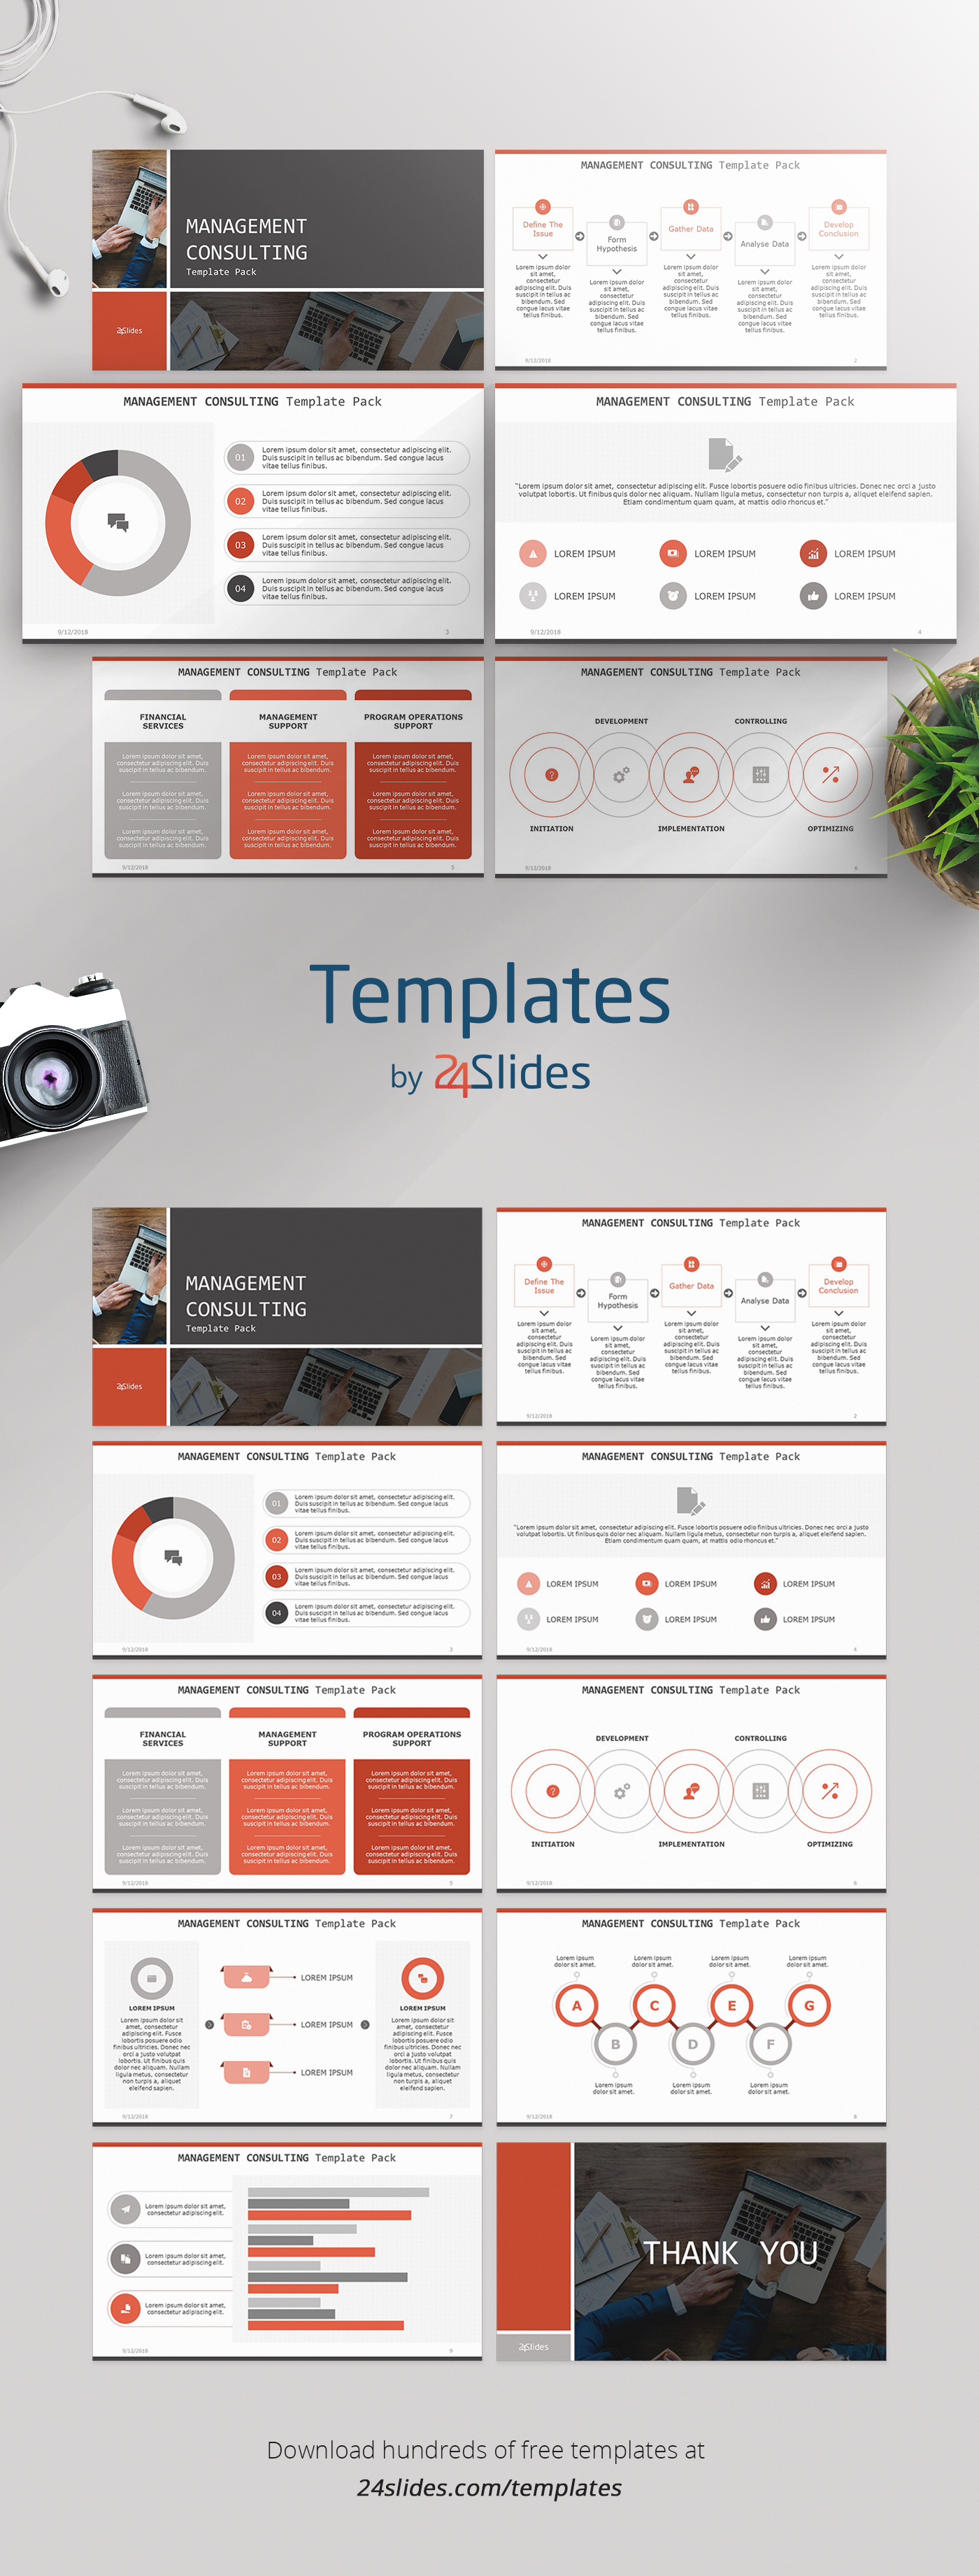 consulting presentation free templates for keynote